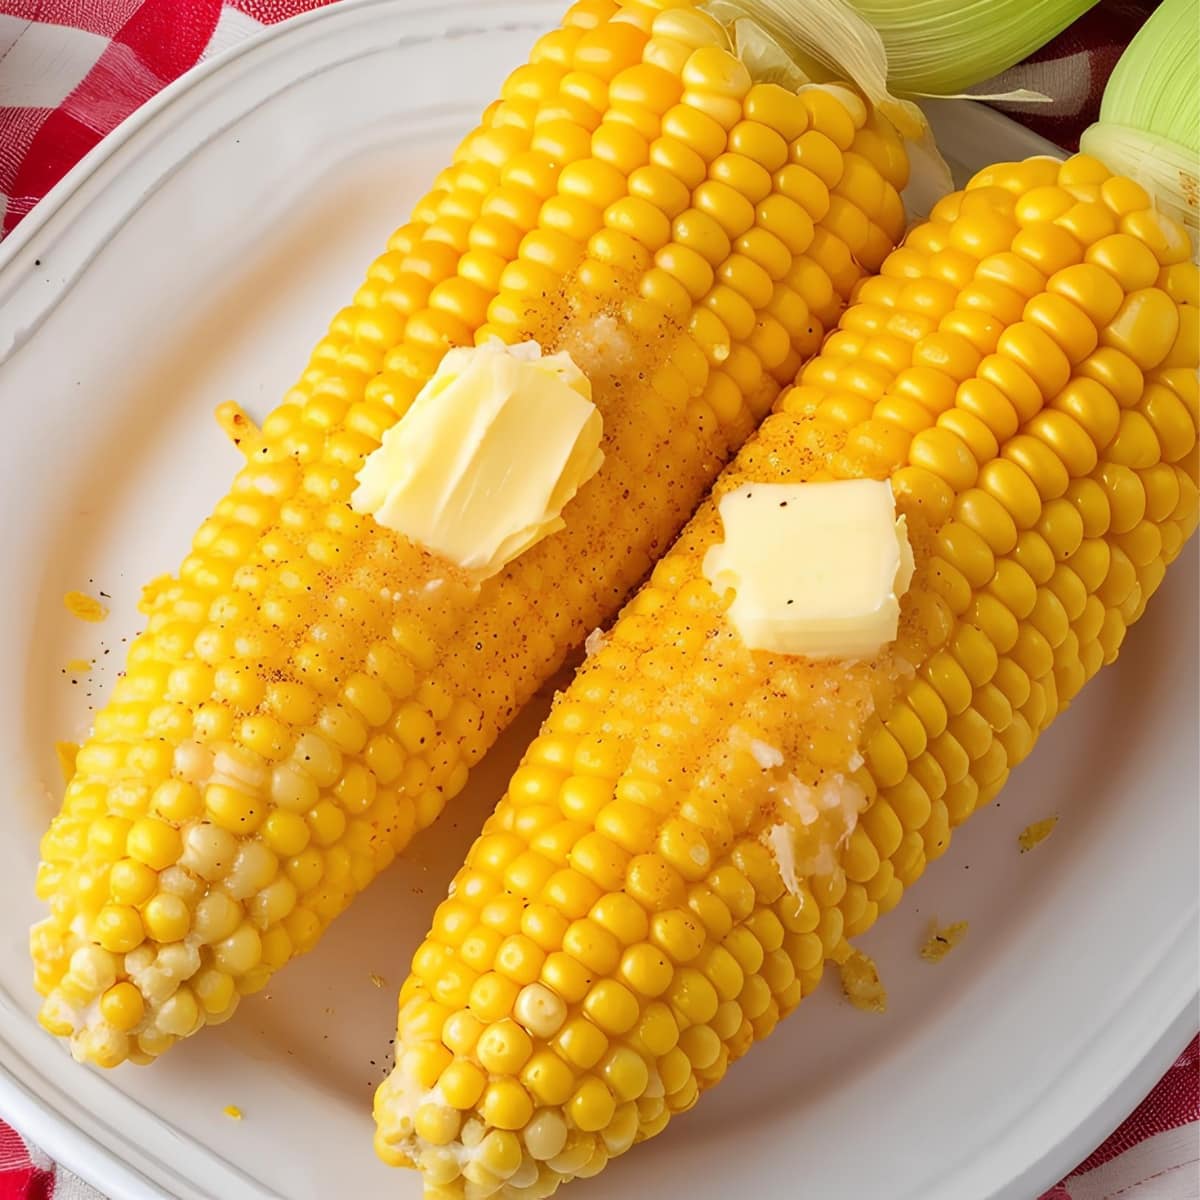 Two ears of Corn in the Cob in a White Plate with Butter